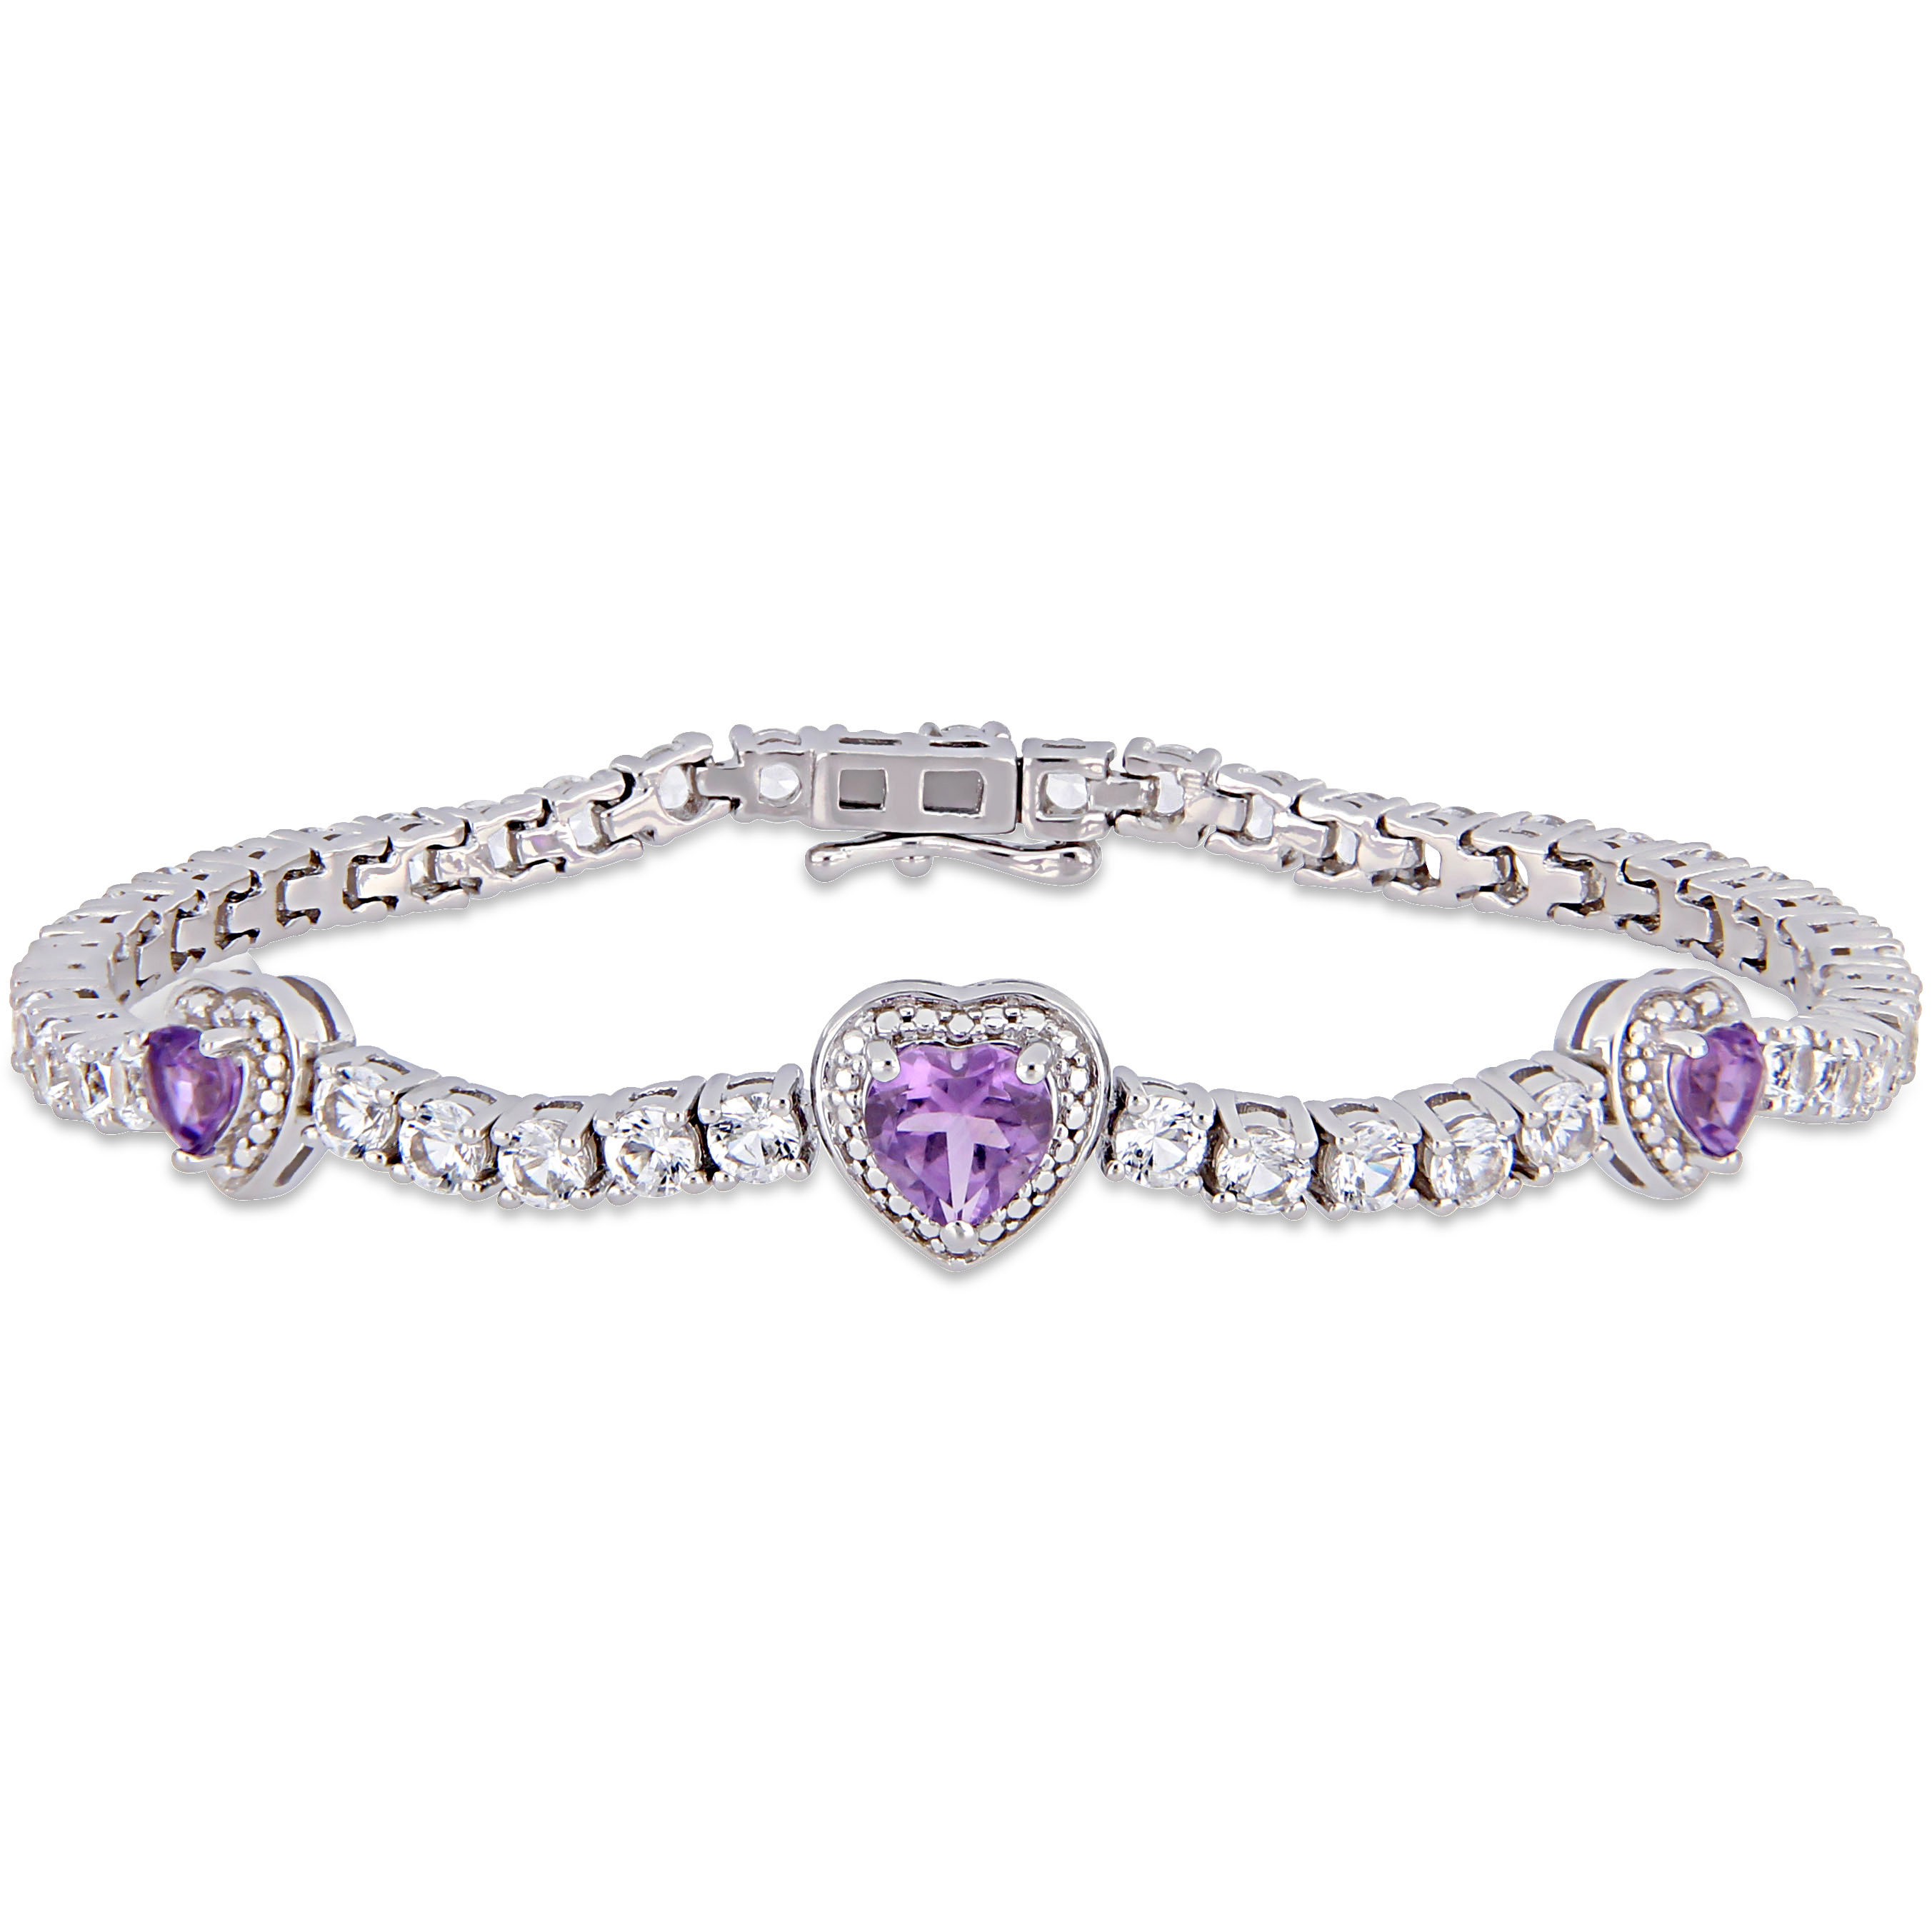 7 3/4 CT TGW Amethyst and Created White Sapphire Stationed Triple Halo Heart Tennis Bracelet in Sterling Silver - 7 in.